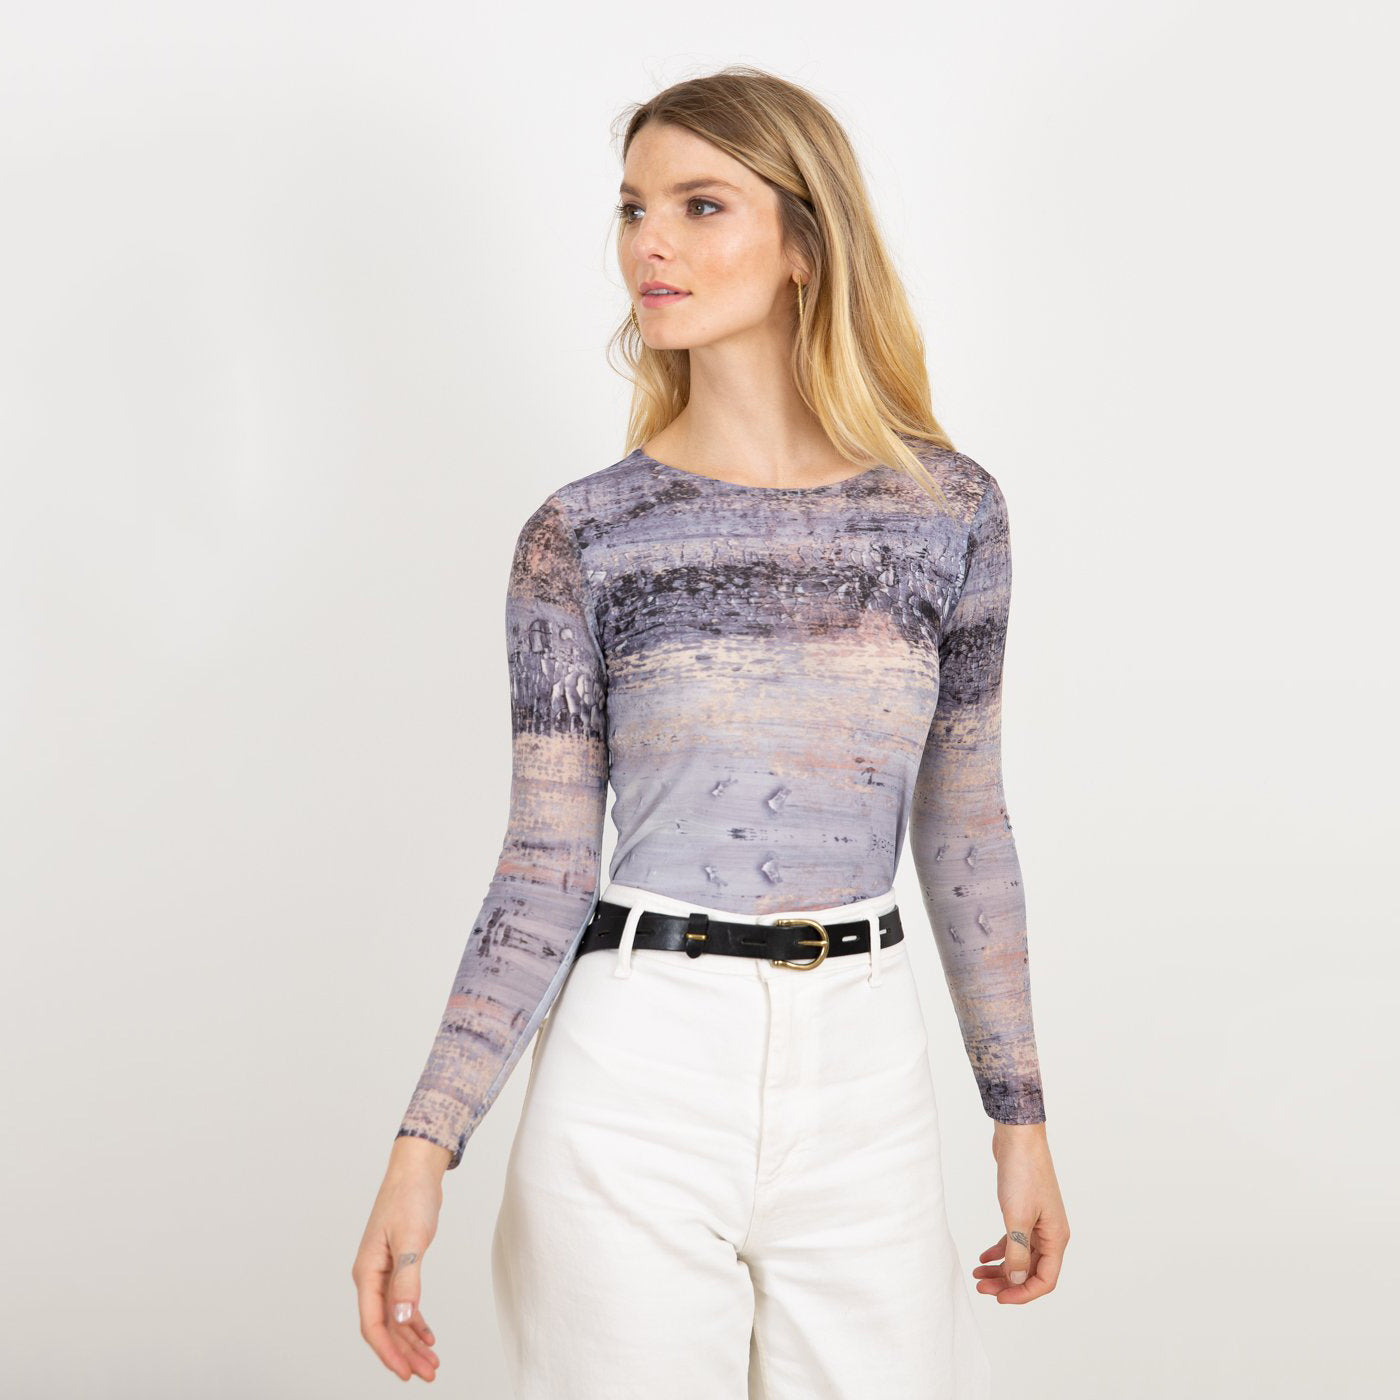 NEW! Florence Double Sheer Top in Silver Canvas by AMB Designs